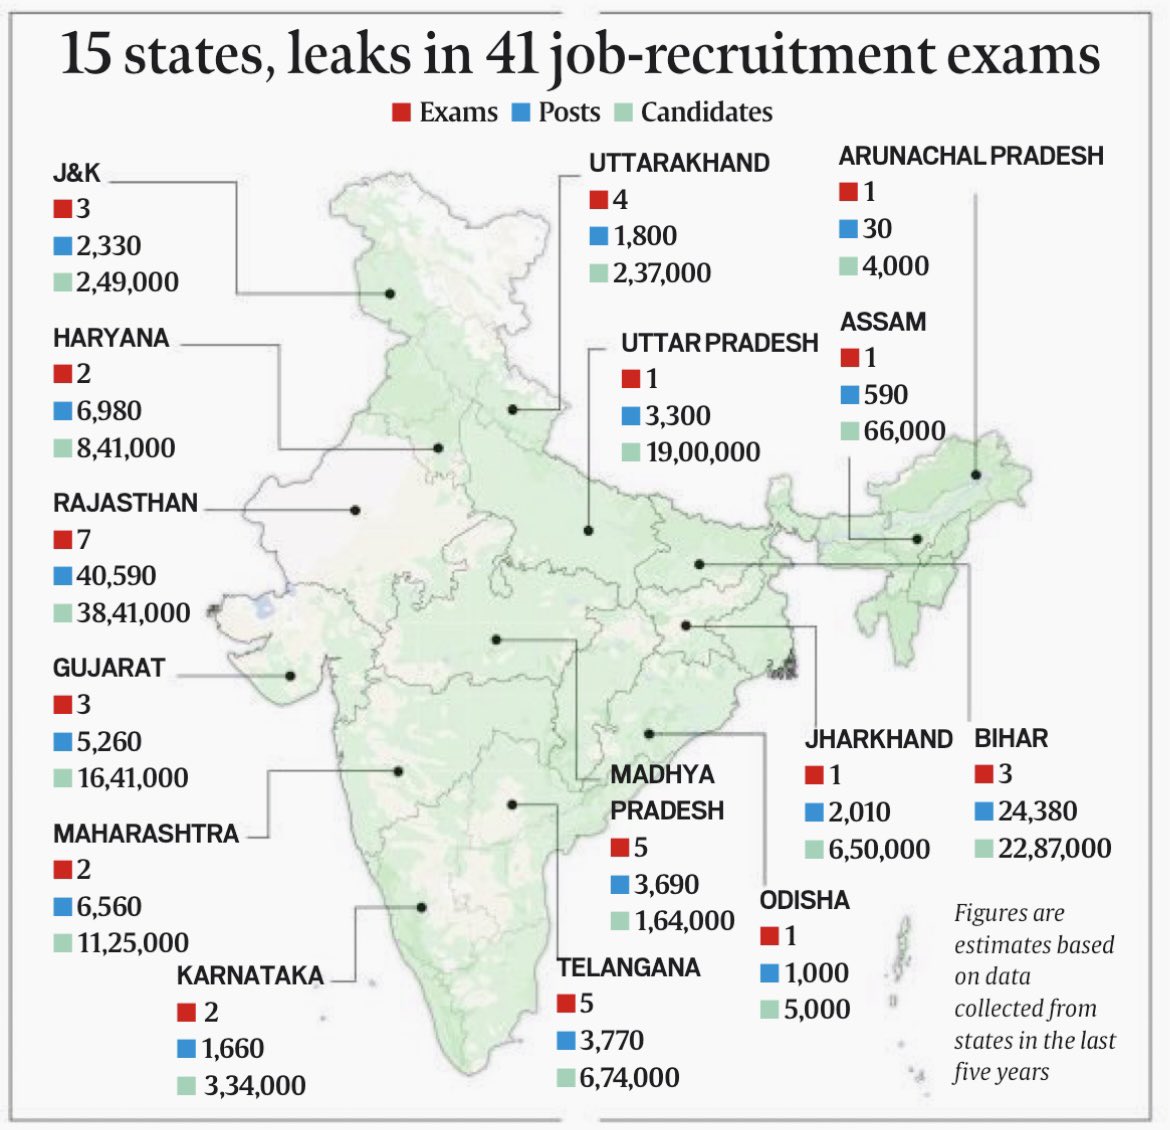 Scams in 41 job-recruitment exams in 15 states over 5 years have played with the careers (and lives) of 1.4 crore applicants—and their families.

The #ExamWarriors were valiantly applying for a mere 1.04 lakh jobs, i.e. 134 applicants per vacancy.

Read: tinyurl.com/2stu3za2